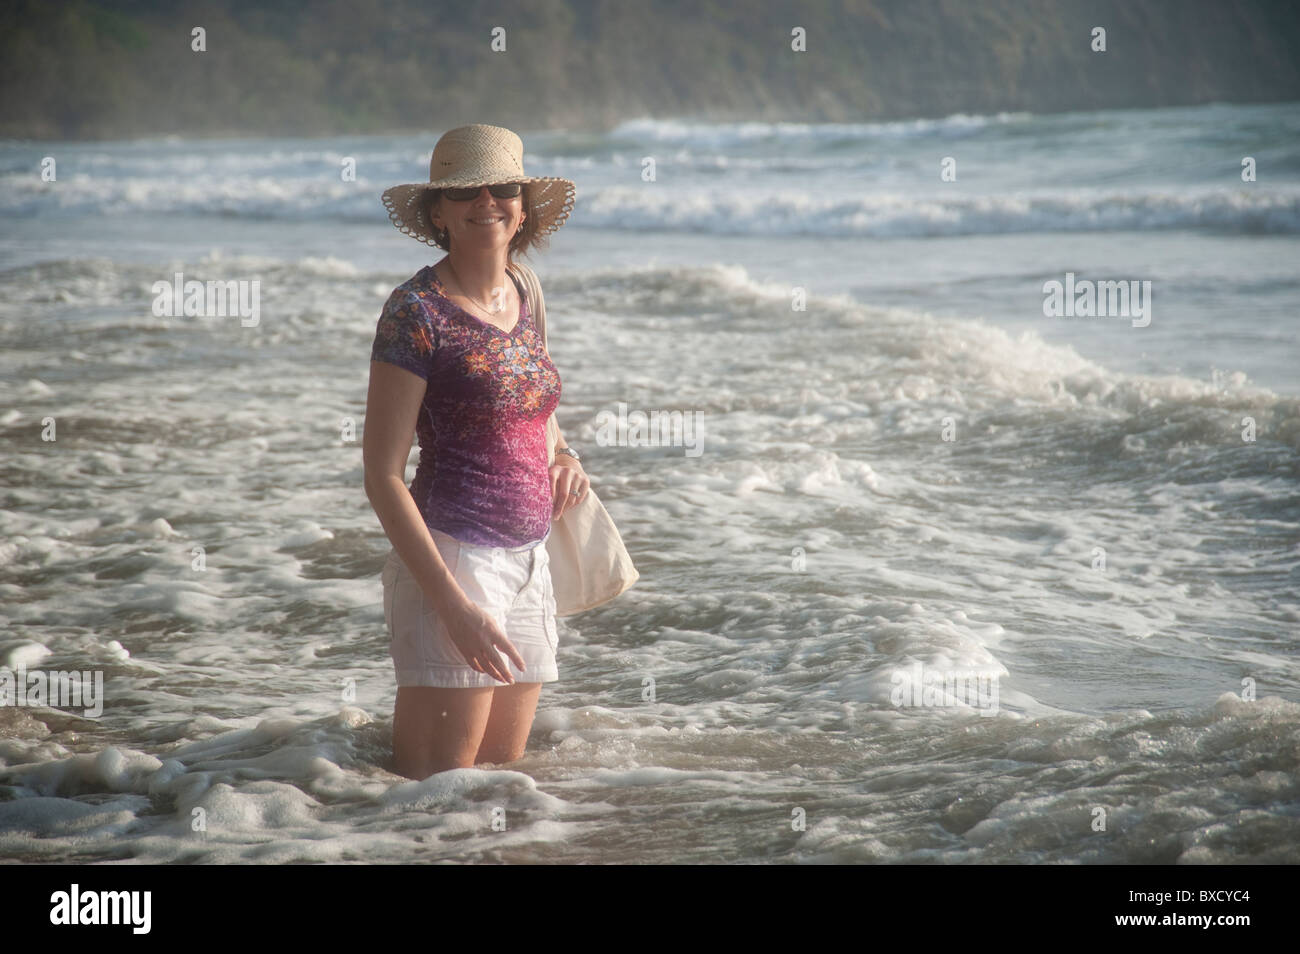 Woman in a hat smiling standing in the ocean surf at knee height Stock Photo